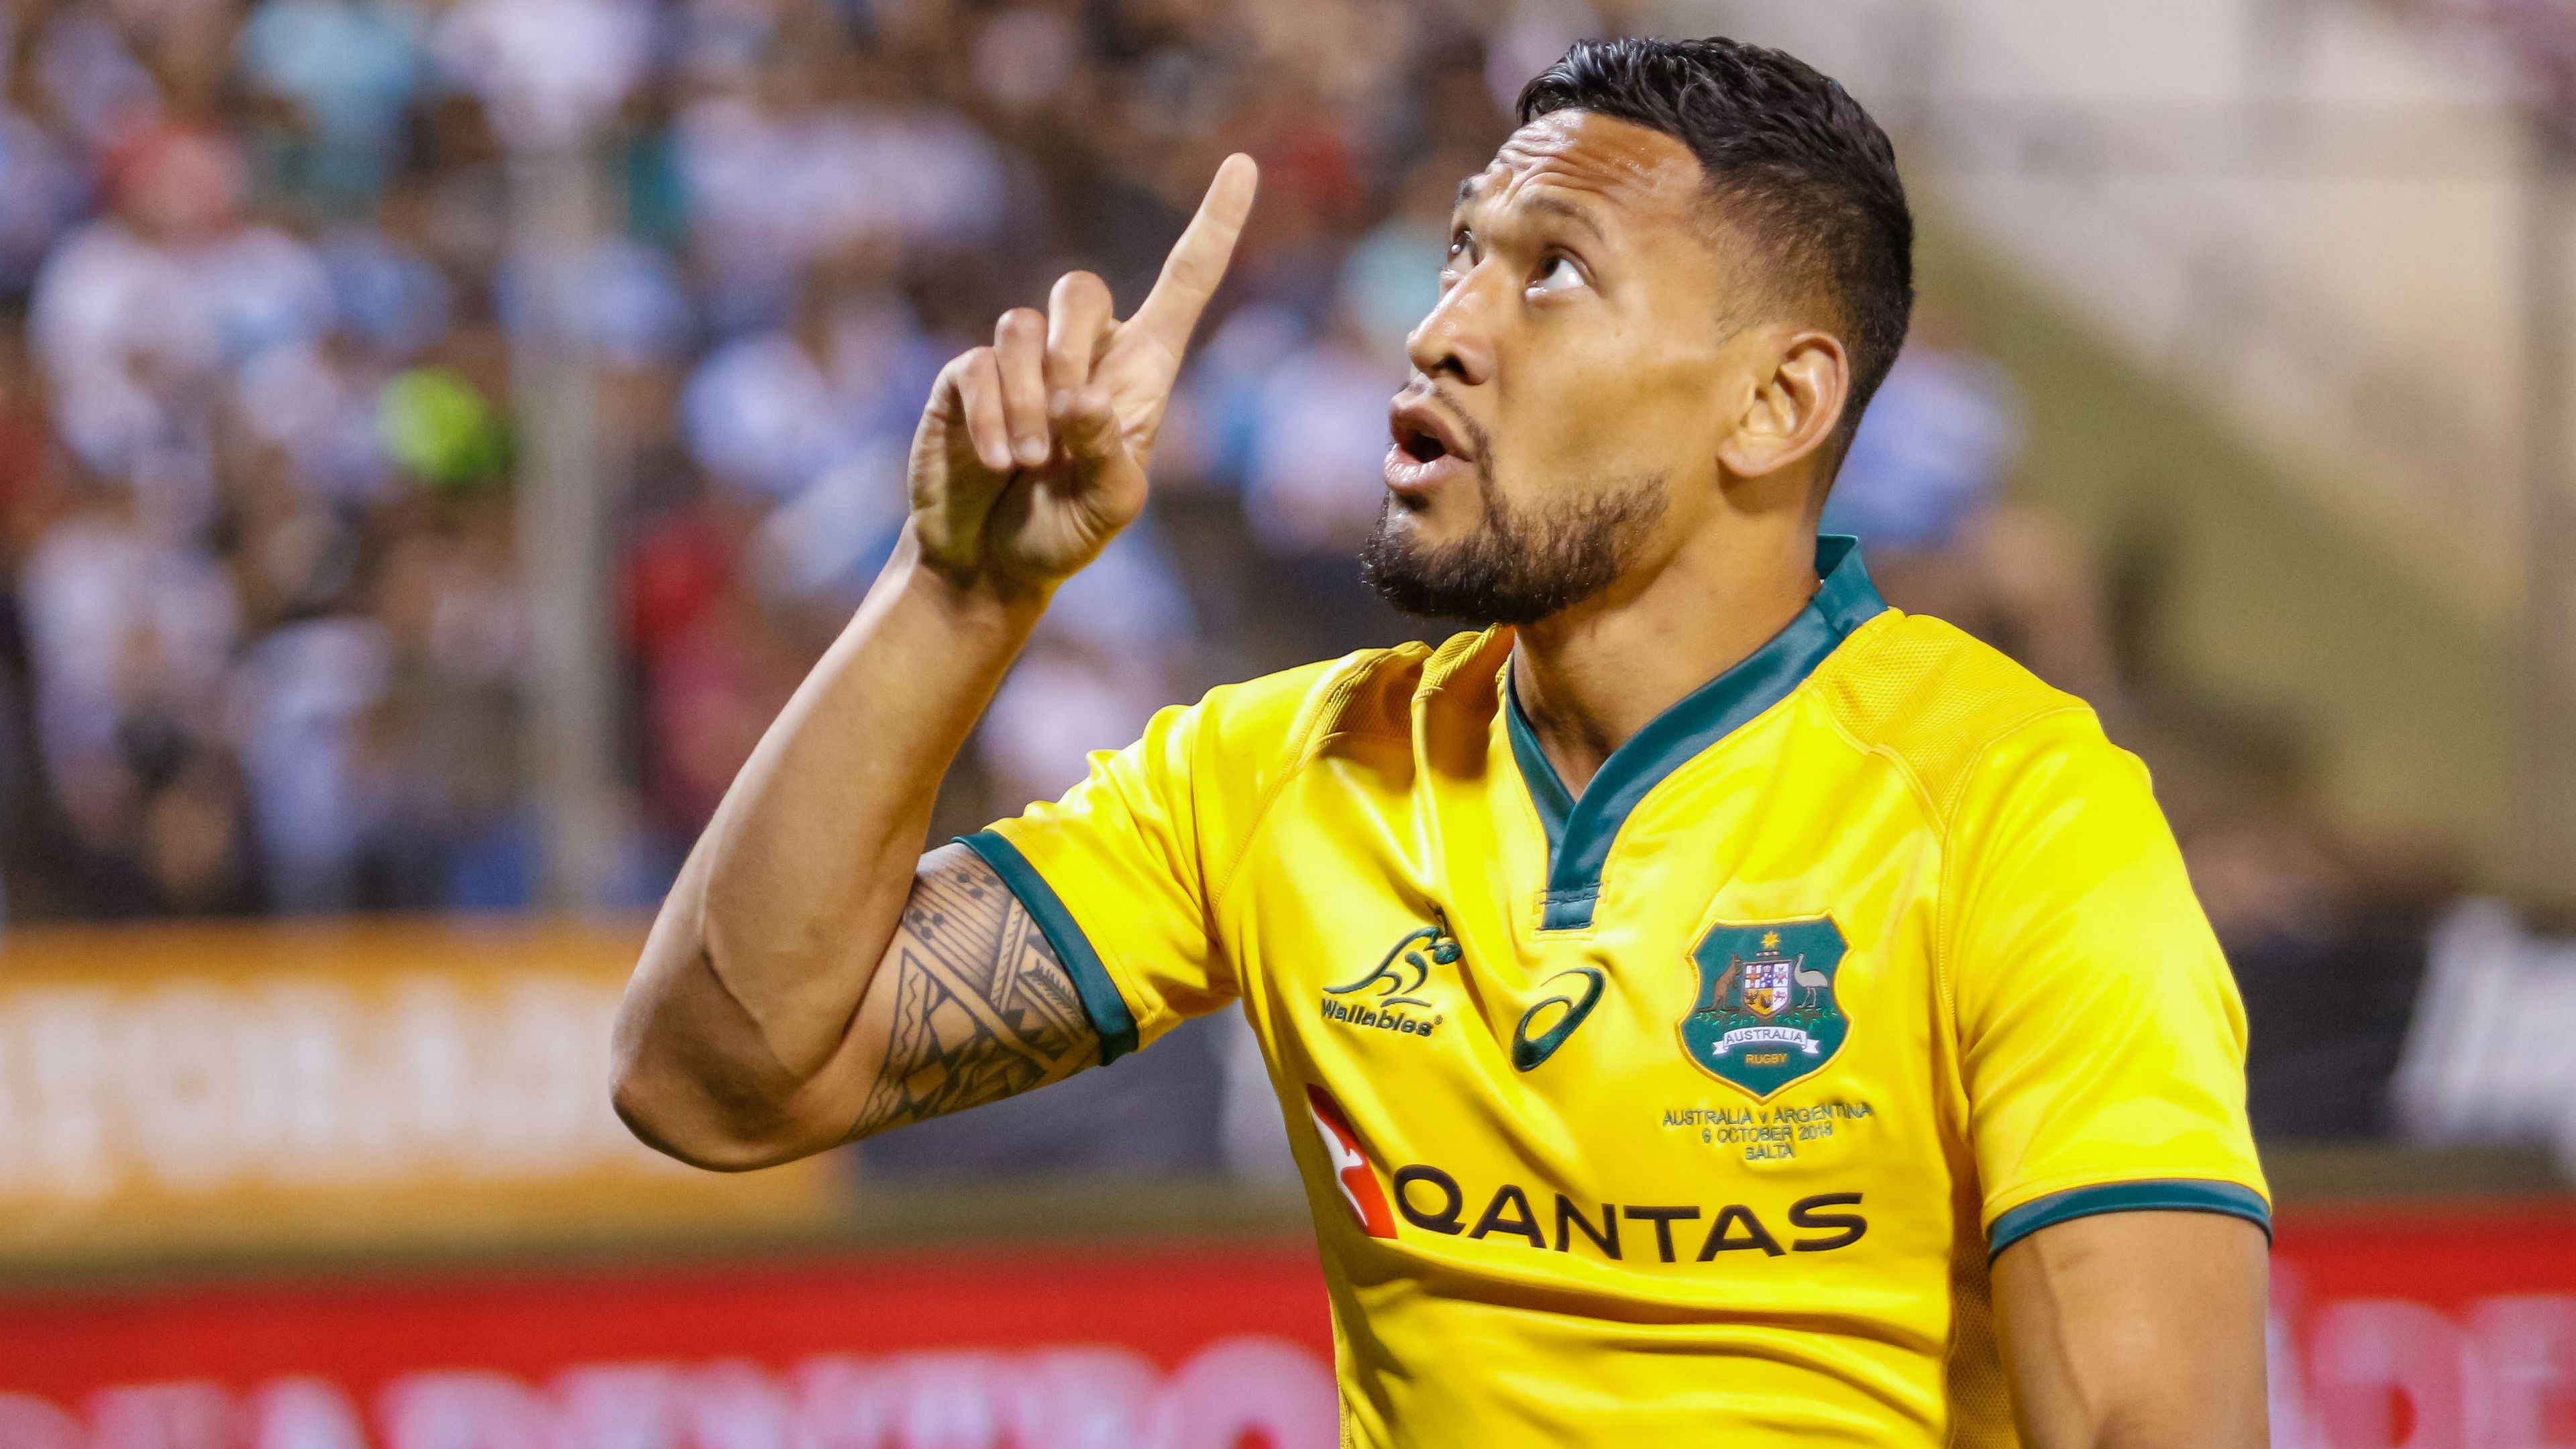 Rugby players' association to conduct faith review following Israel Folau saga